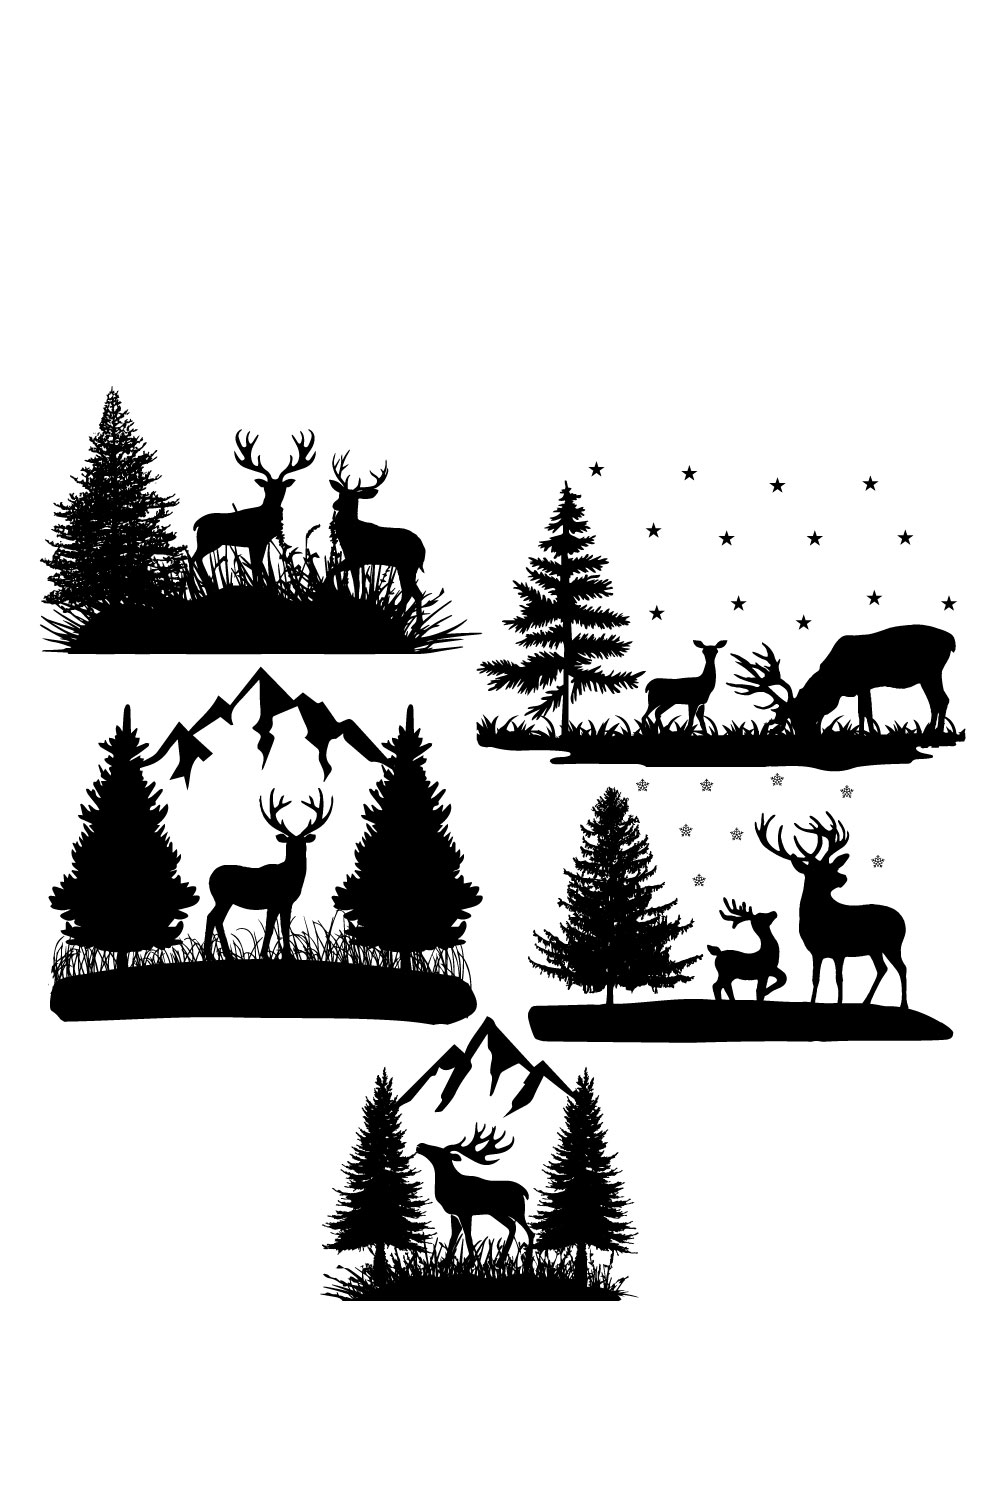 Set of silhouettes of deer and trees.